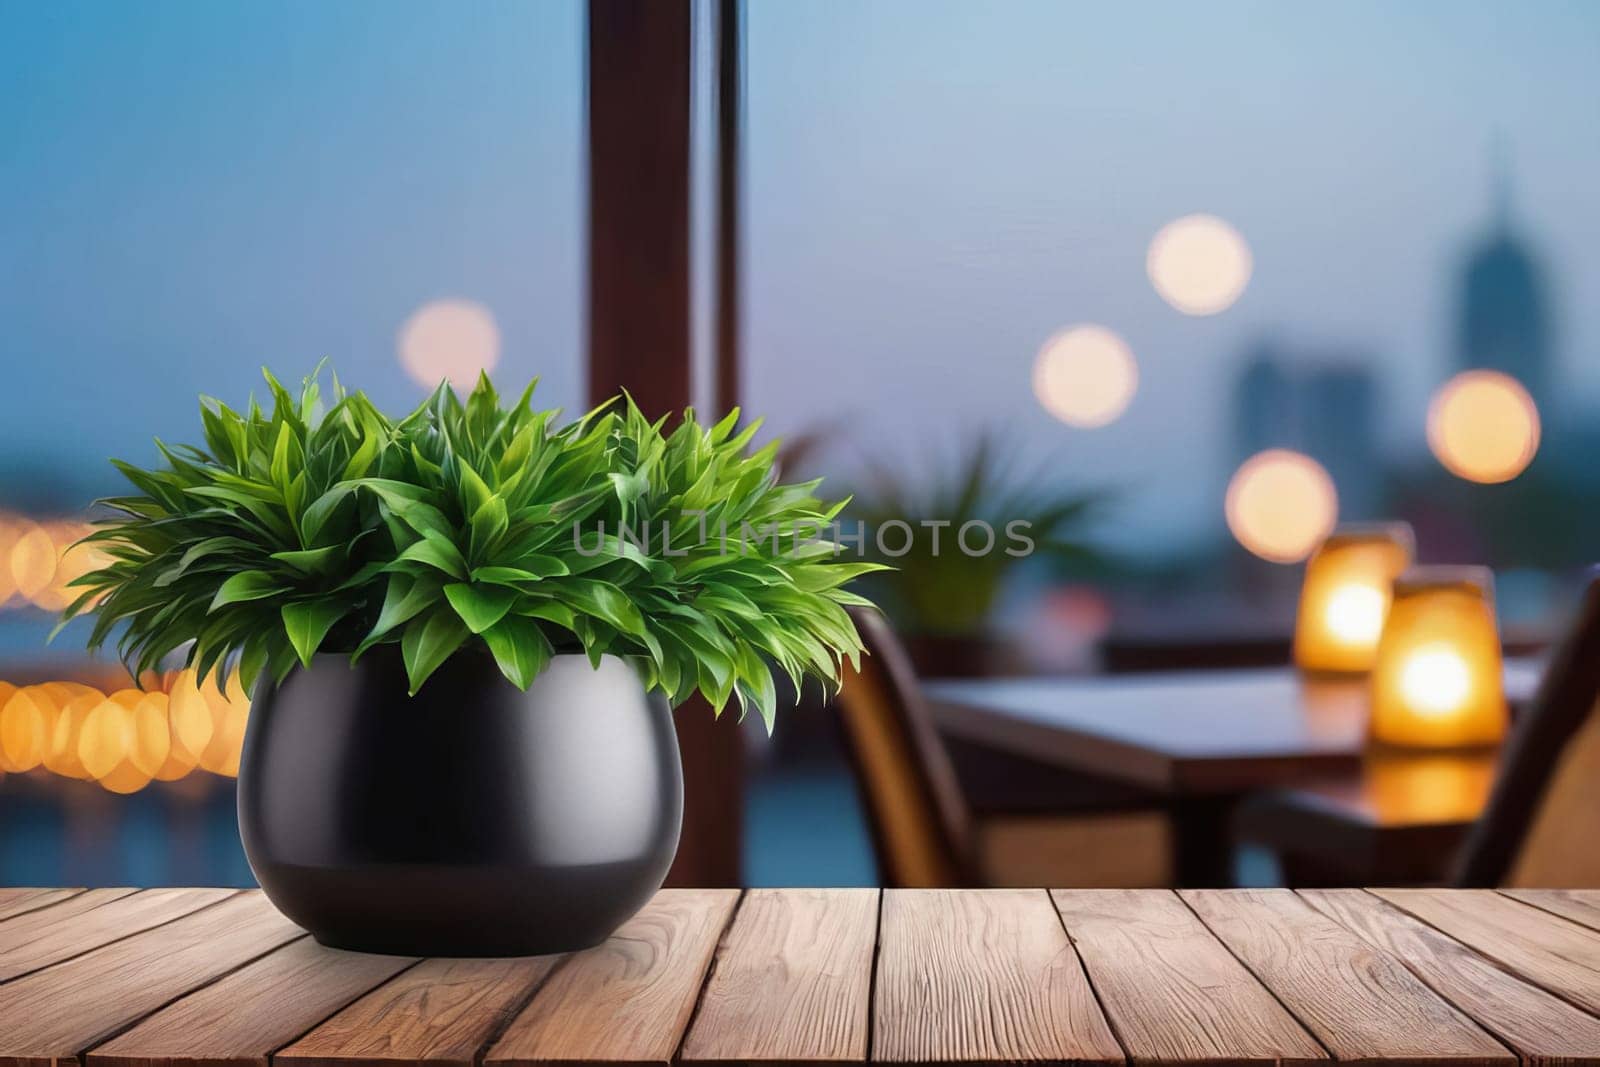 An inviting scene featuring an empty wooden table with warm bokeh lights, set against a blurred restaurant background, perfect for food and dining related content